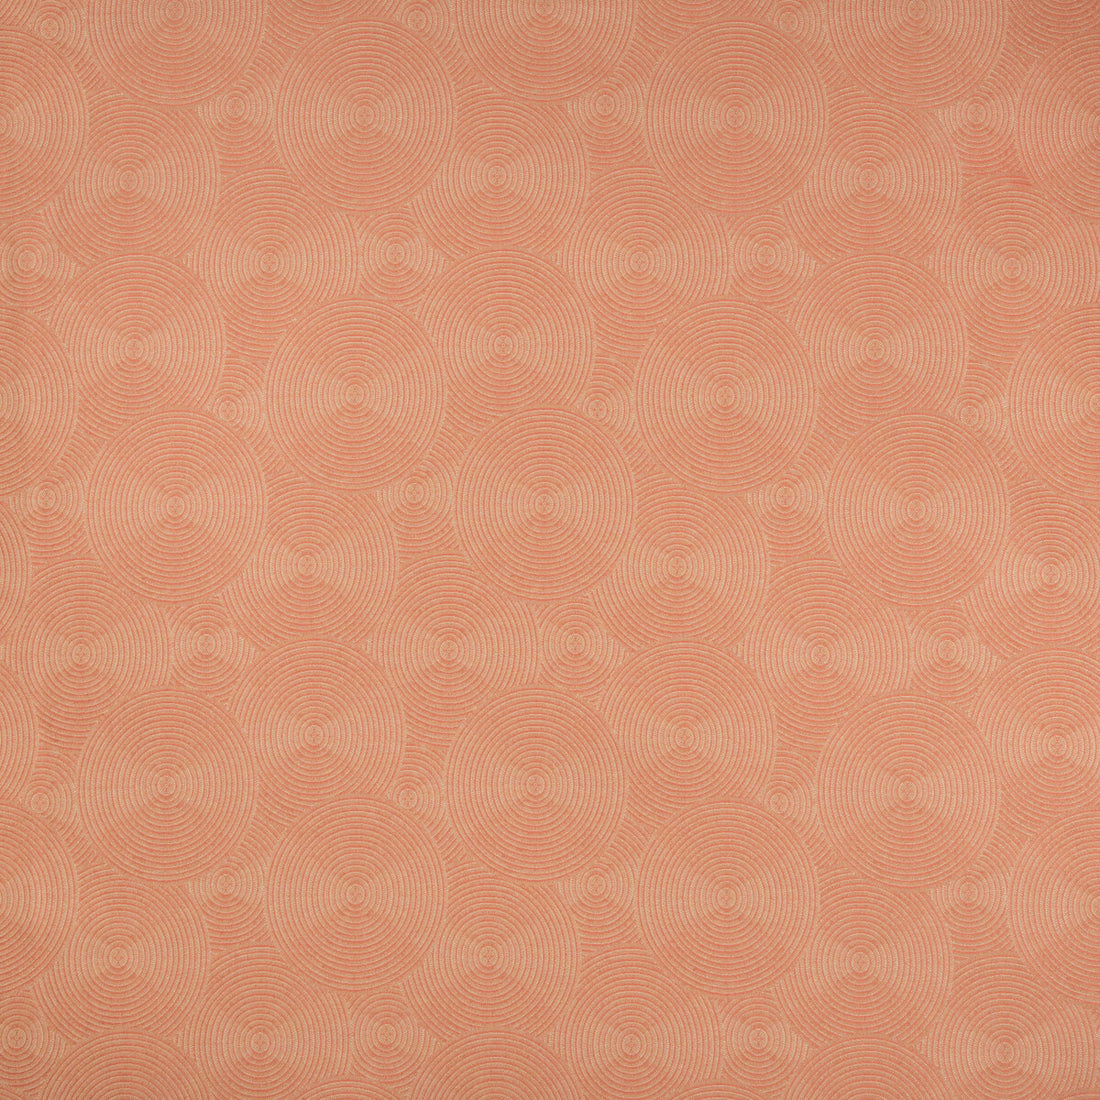 Reunion fabric in coral color - pattern 32898.12.0 - by Kravet Contract in the Gis Crypton collection